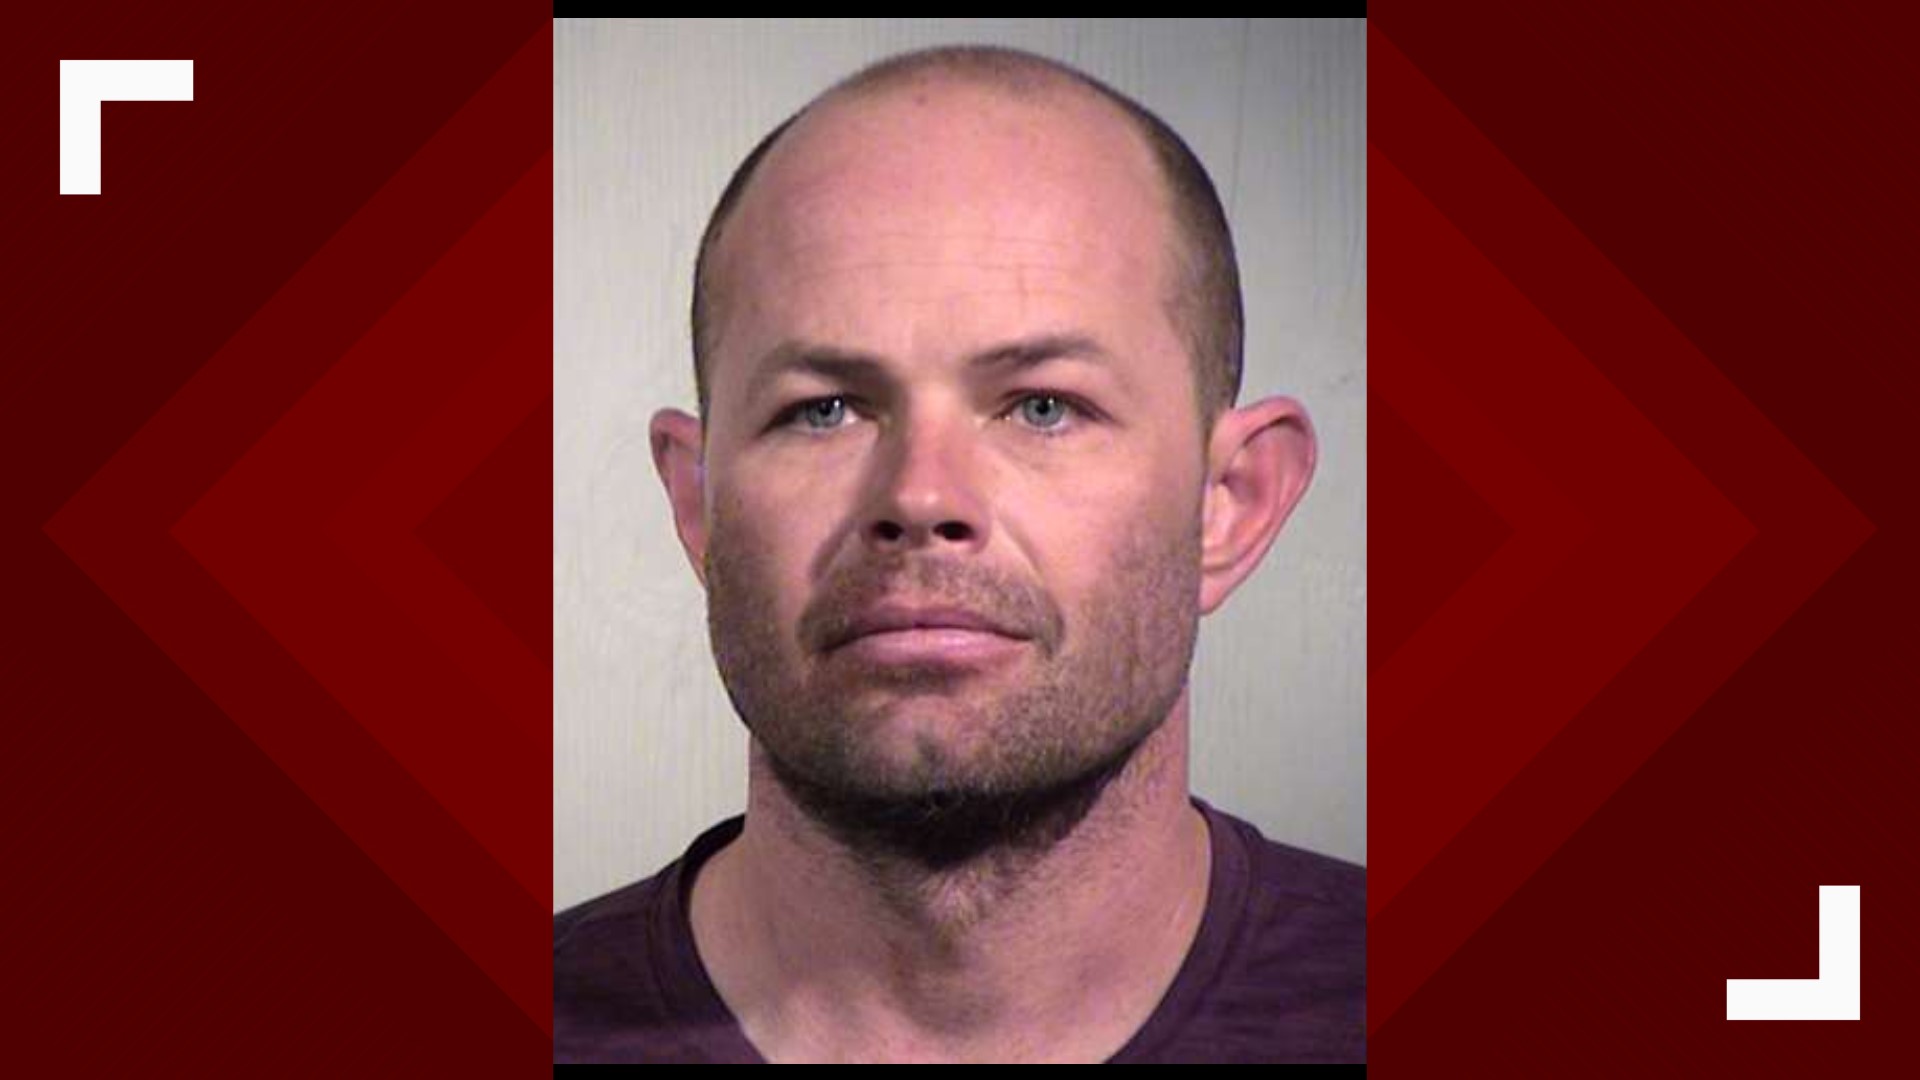 40-year-old Jerry Sanstead has made his initial court appearance. He is accused of crossing two lanes of traffic and hitting and killing Salt River Police Officer Clayton Townsend.